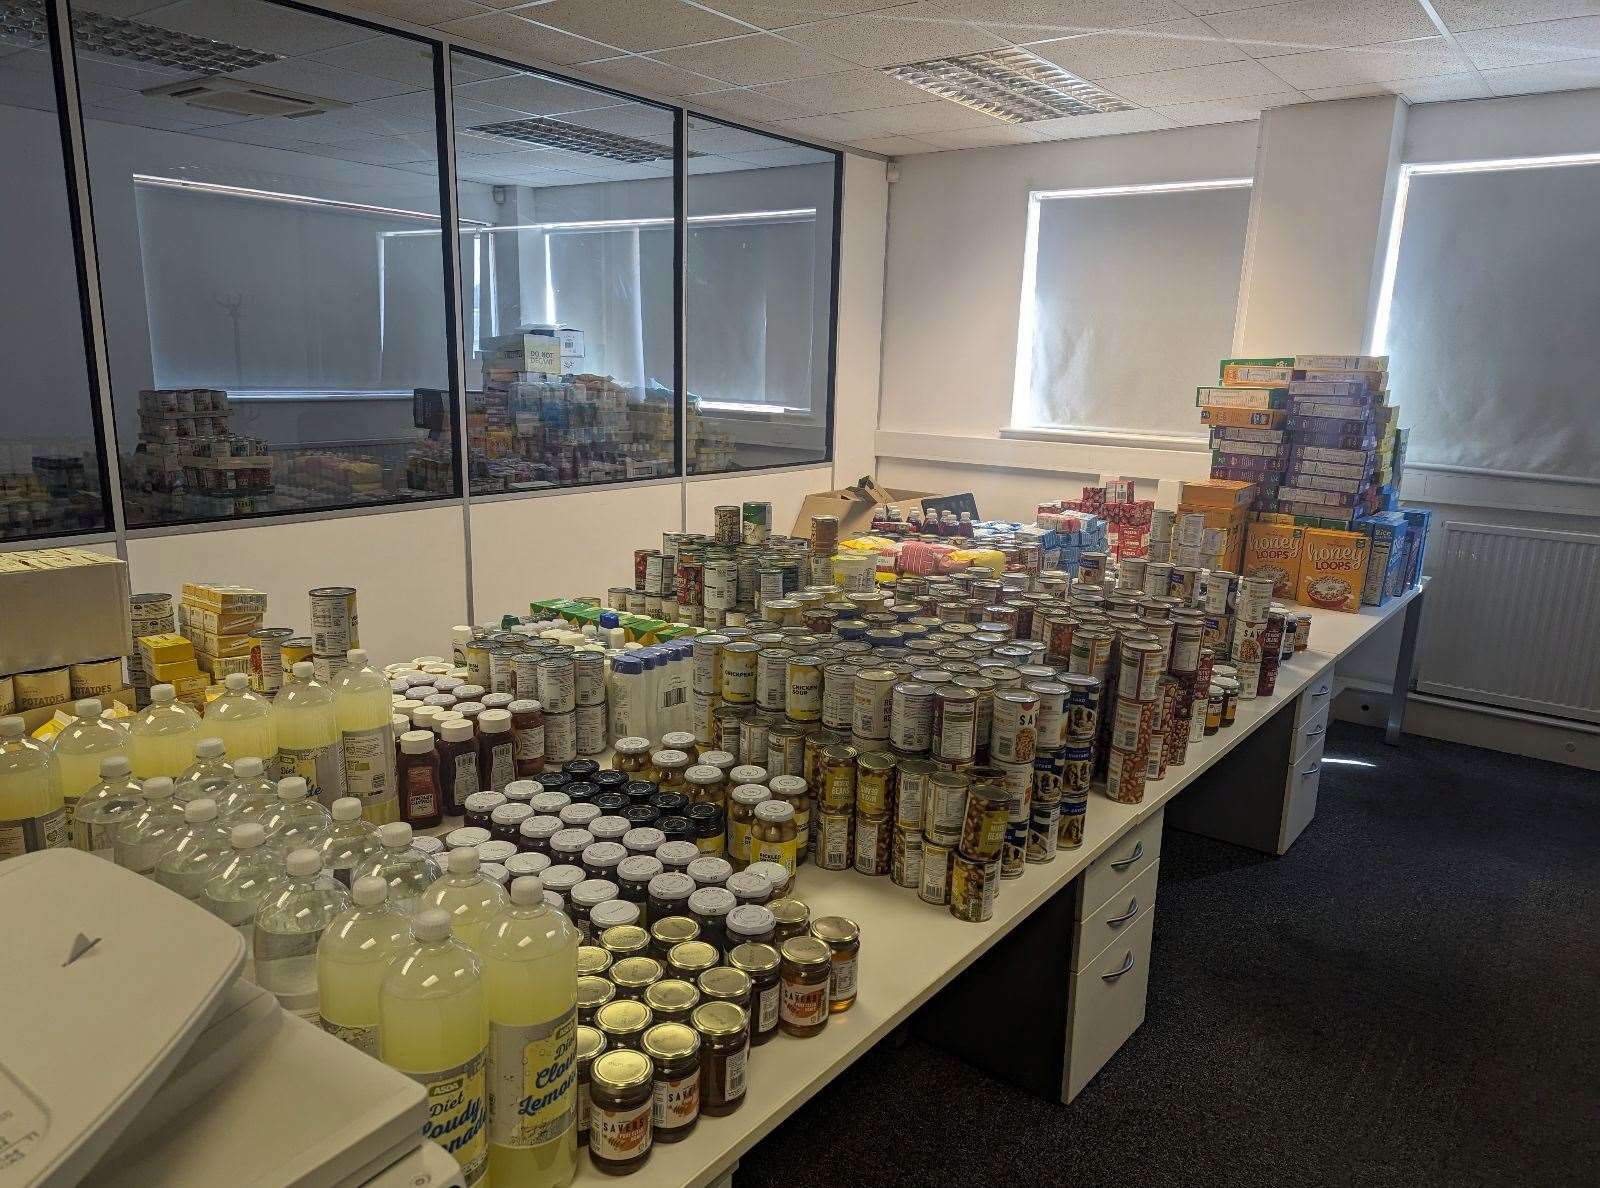 kmfm donated 6.77 tonnes of food to food banks across the county last year